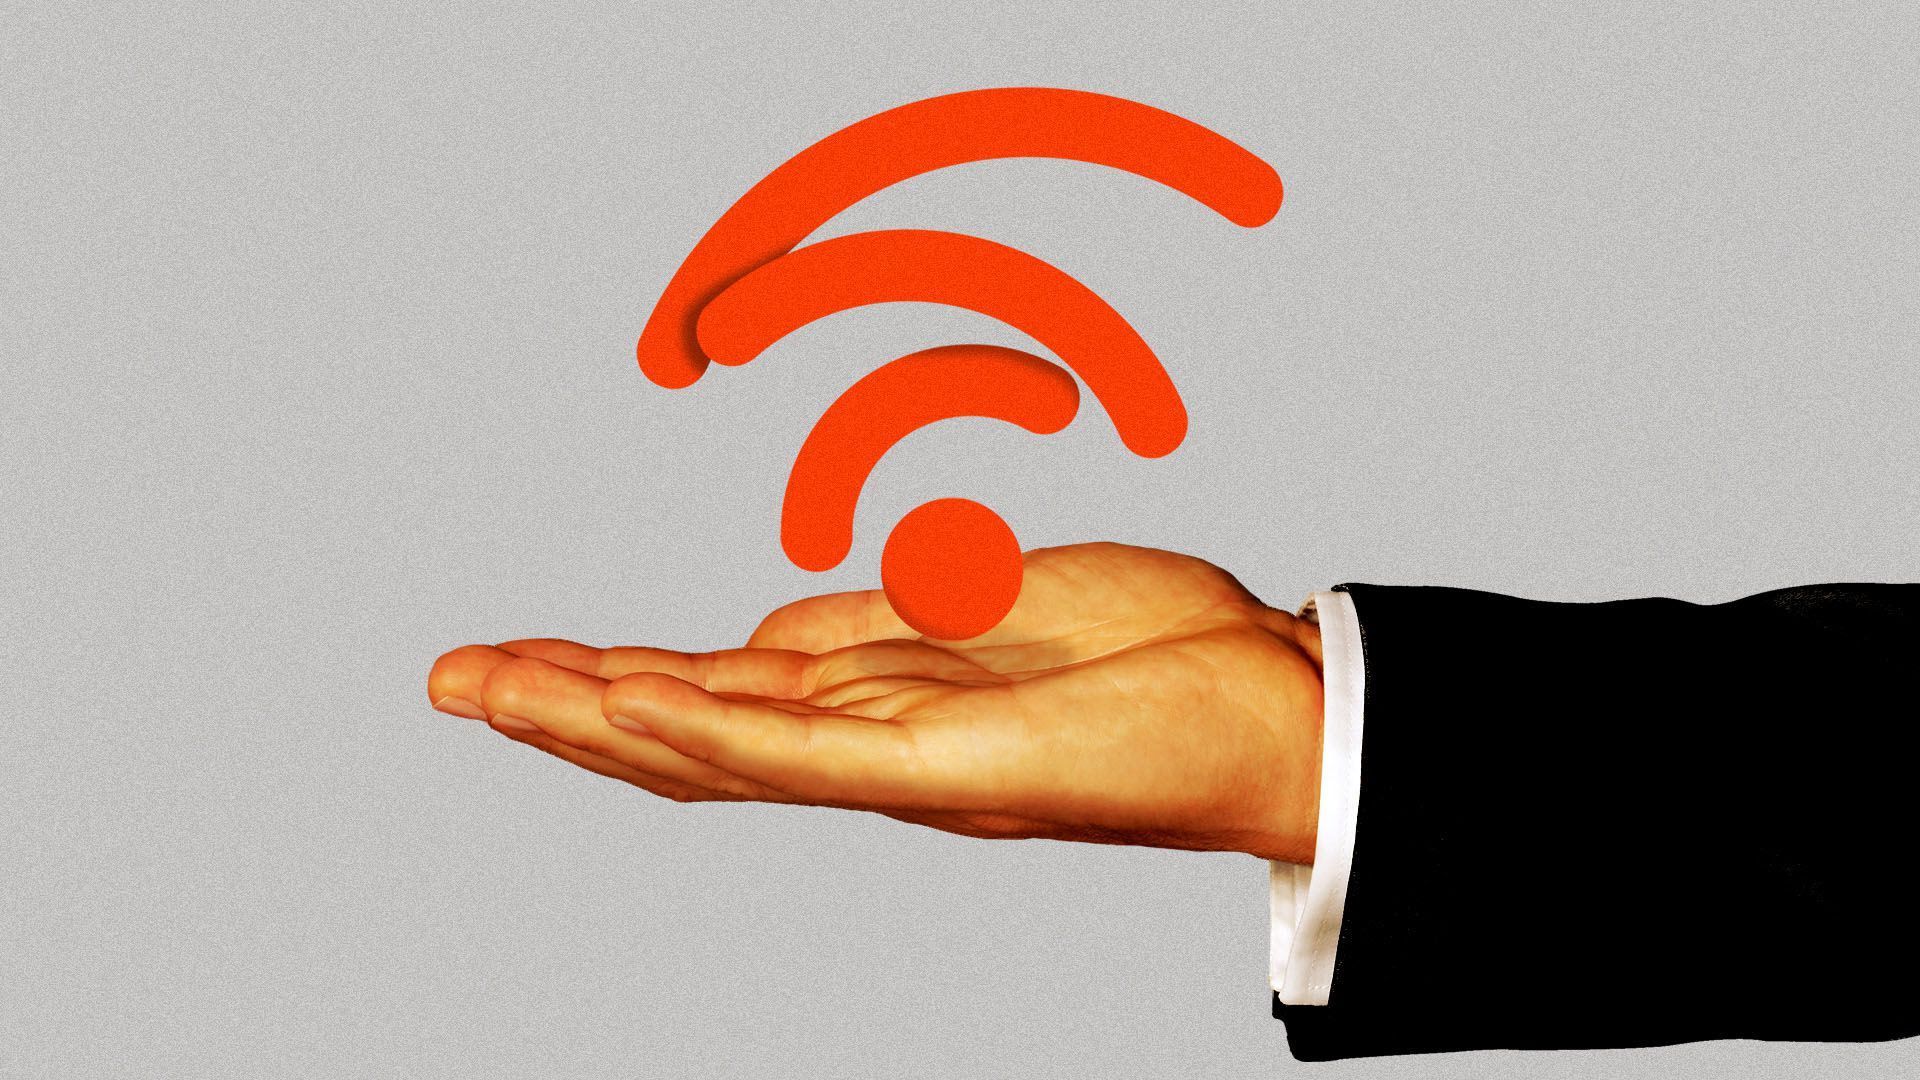 Illustration of an outstretched hand holding a squashed red wifi signal